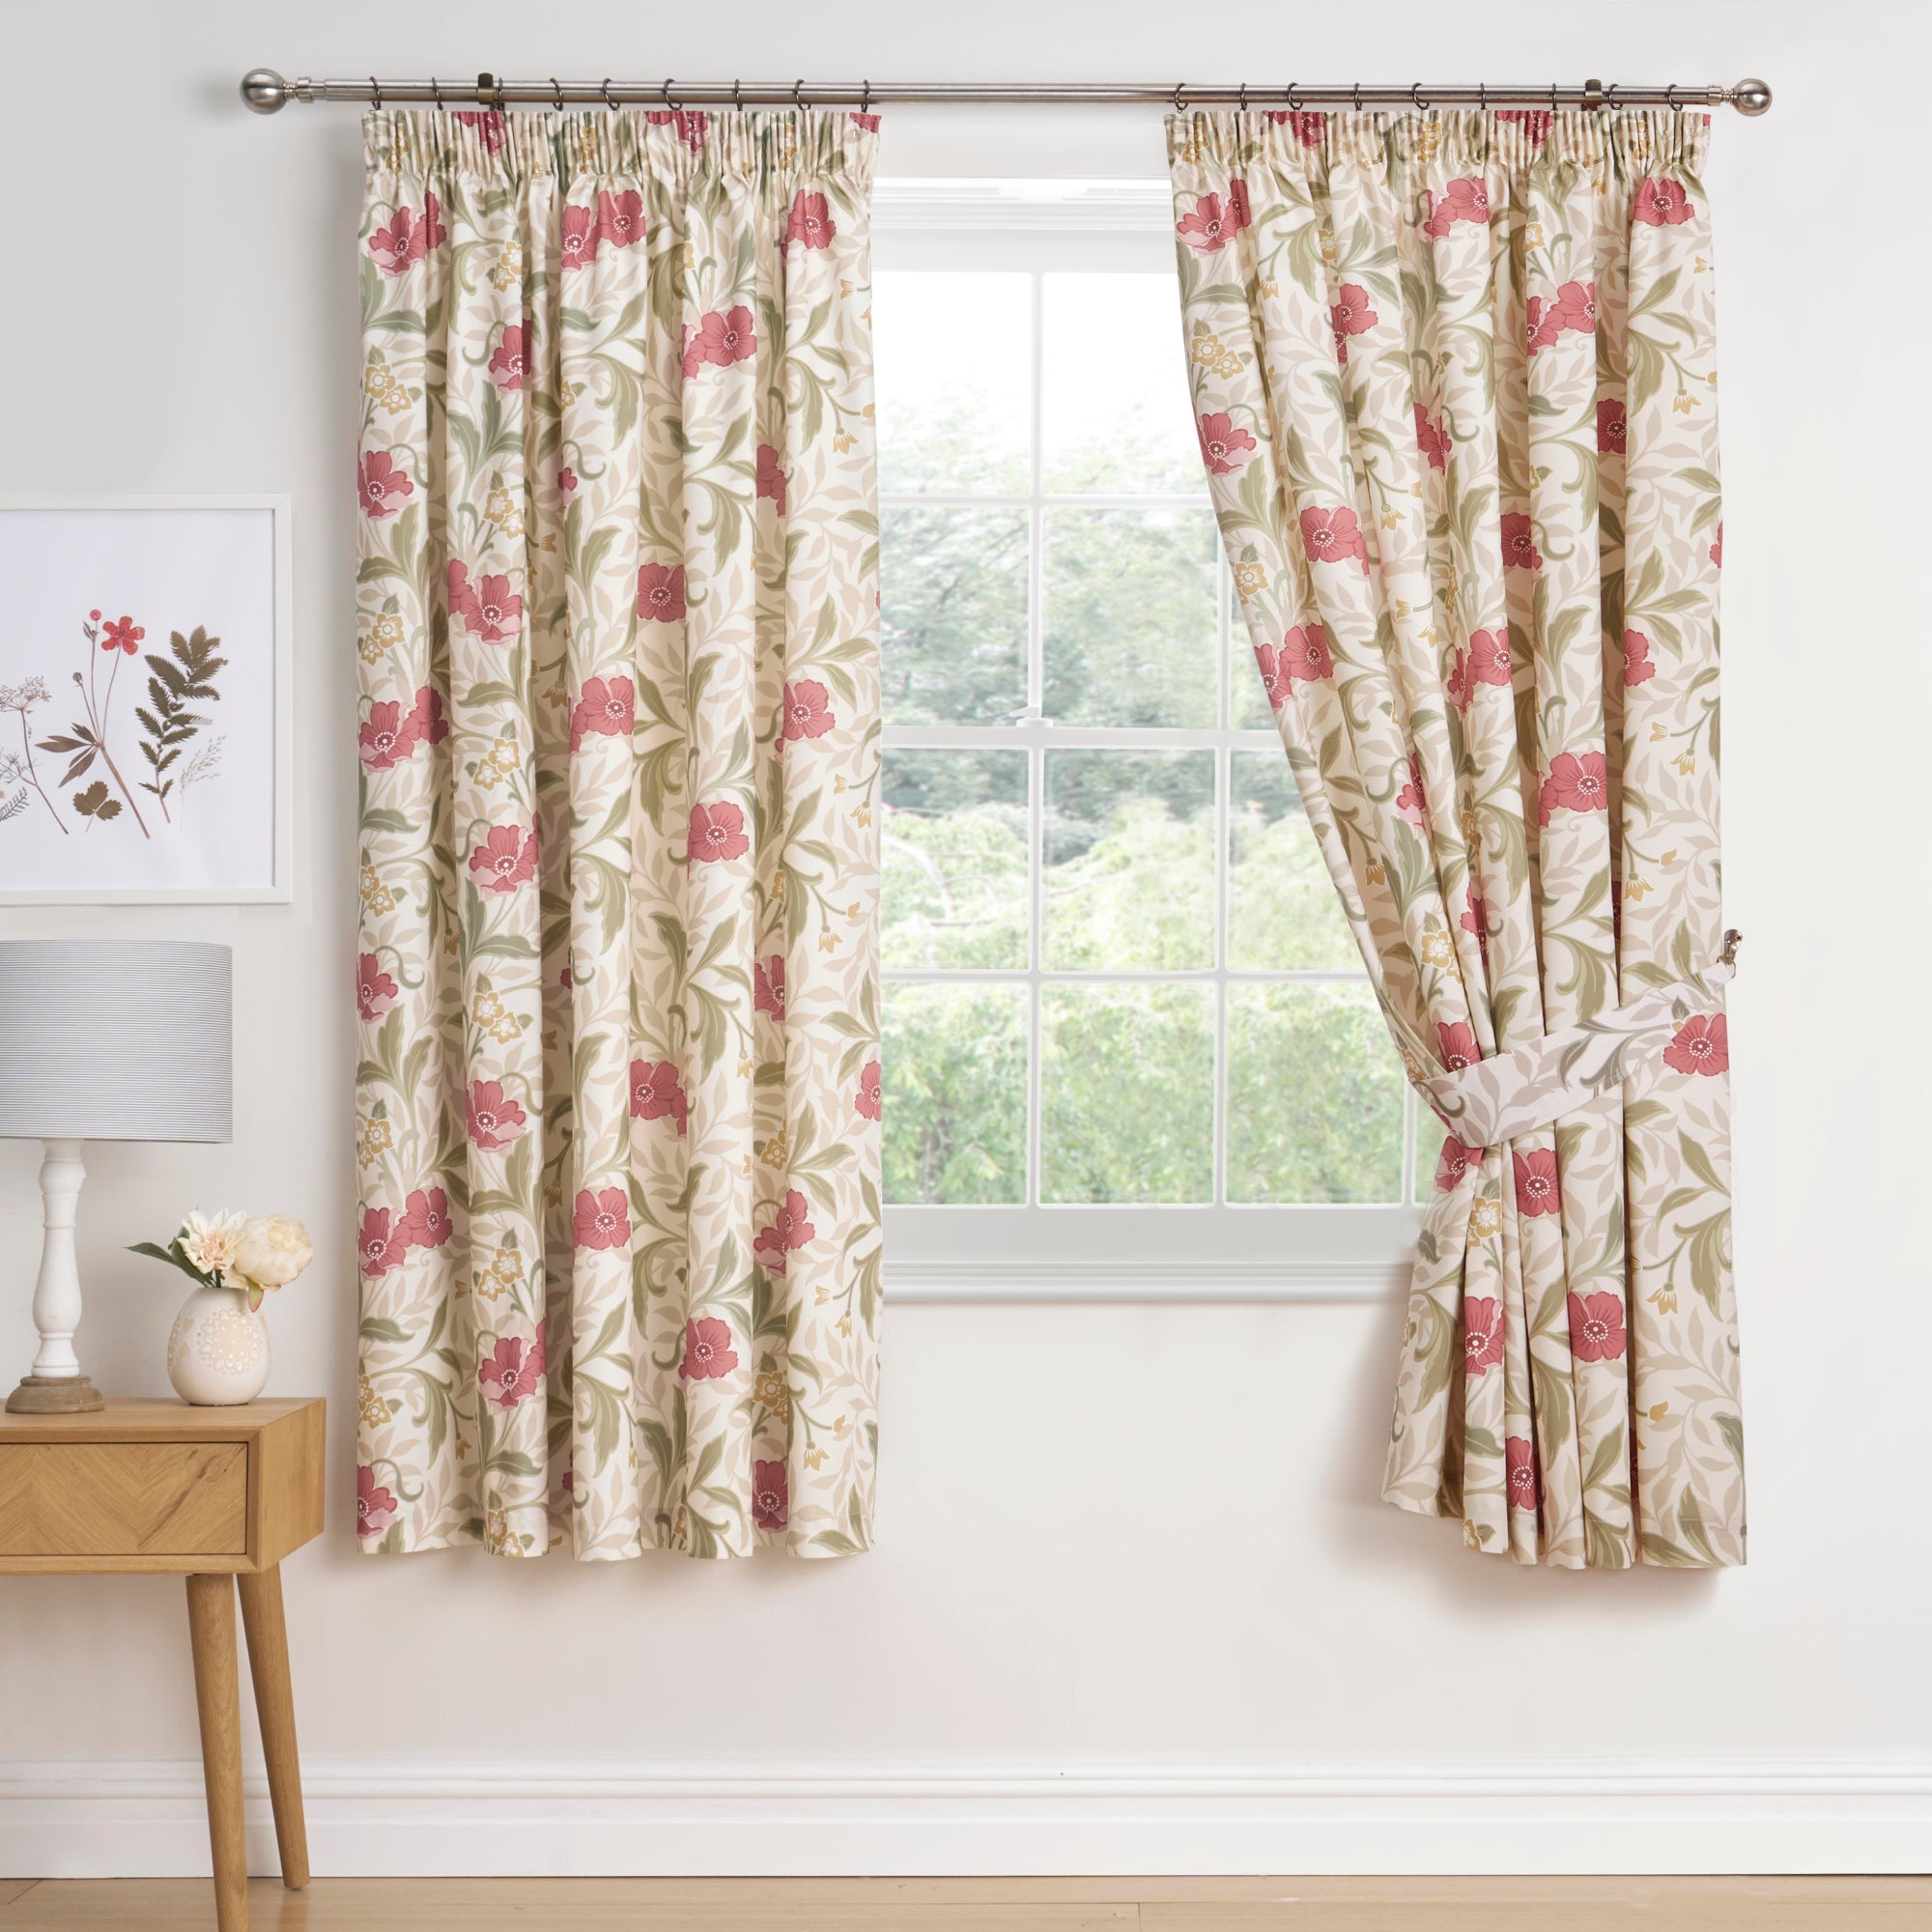 Pair of Pencil Pleat Curtains With Tie-Backs Sandringham by Dreams & Drapes Design in Red